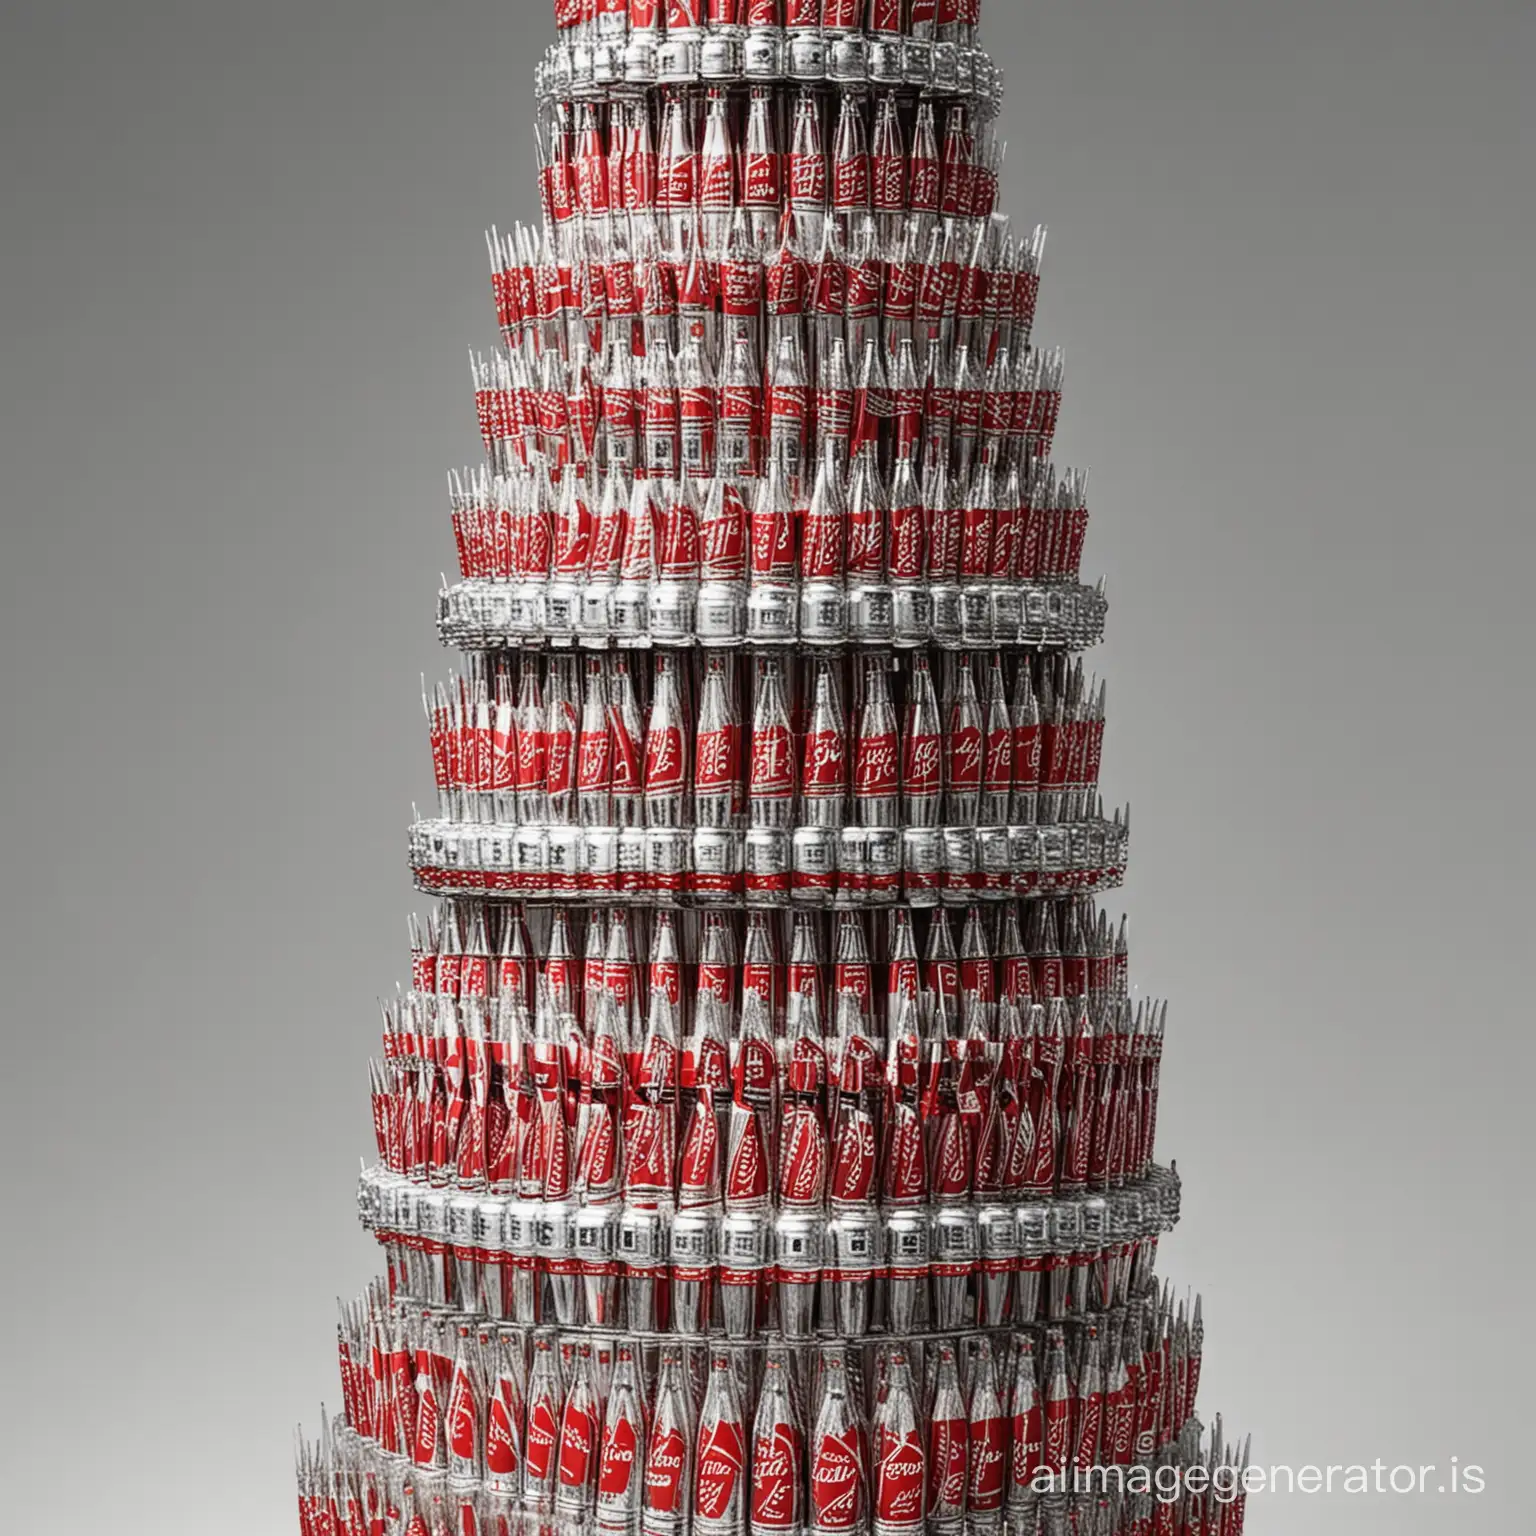 exotic artistic tower with a weird shape by gluing a lot of Budweiser bottles together